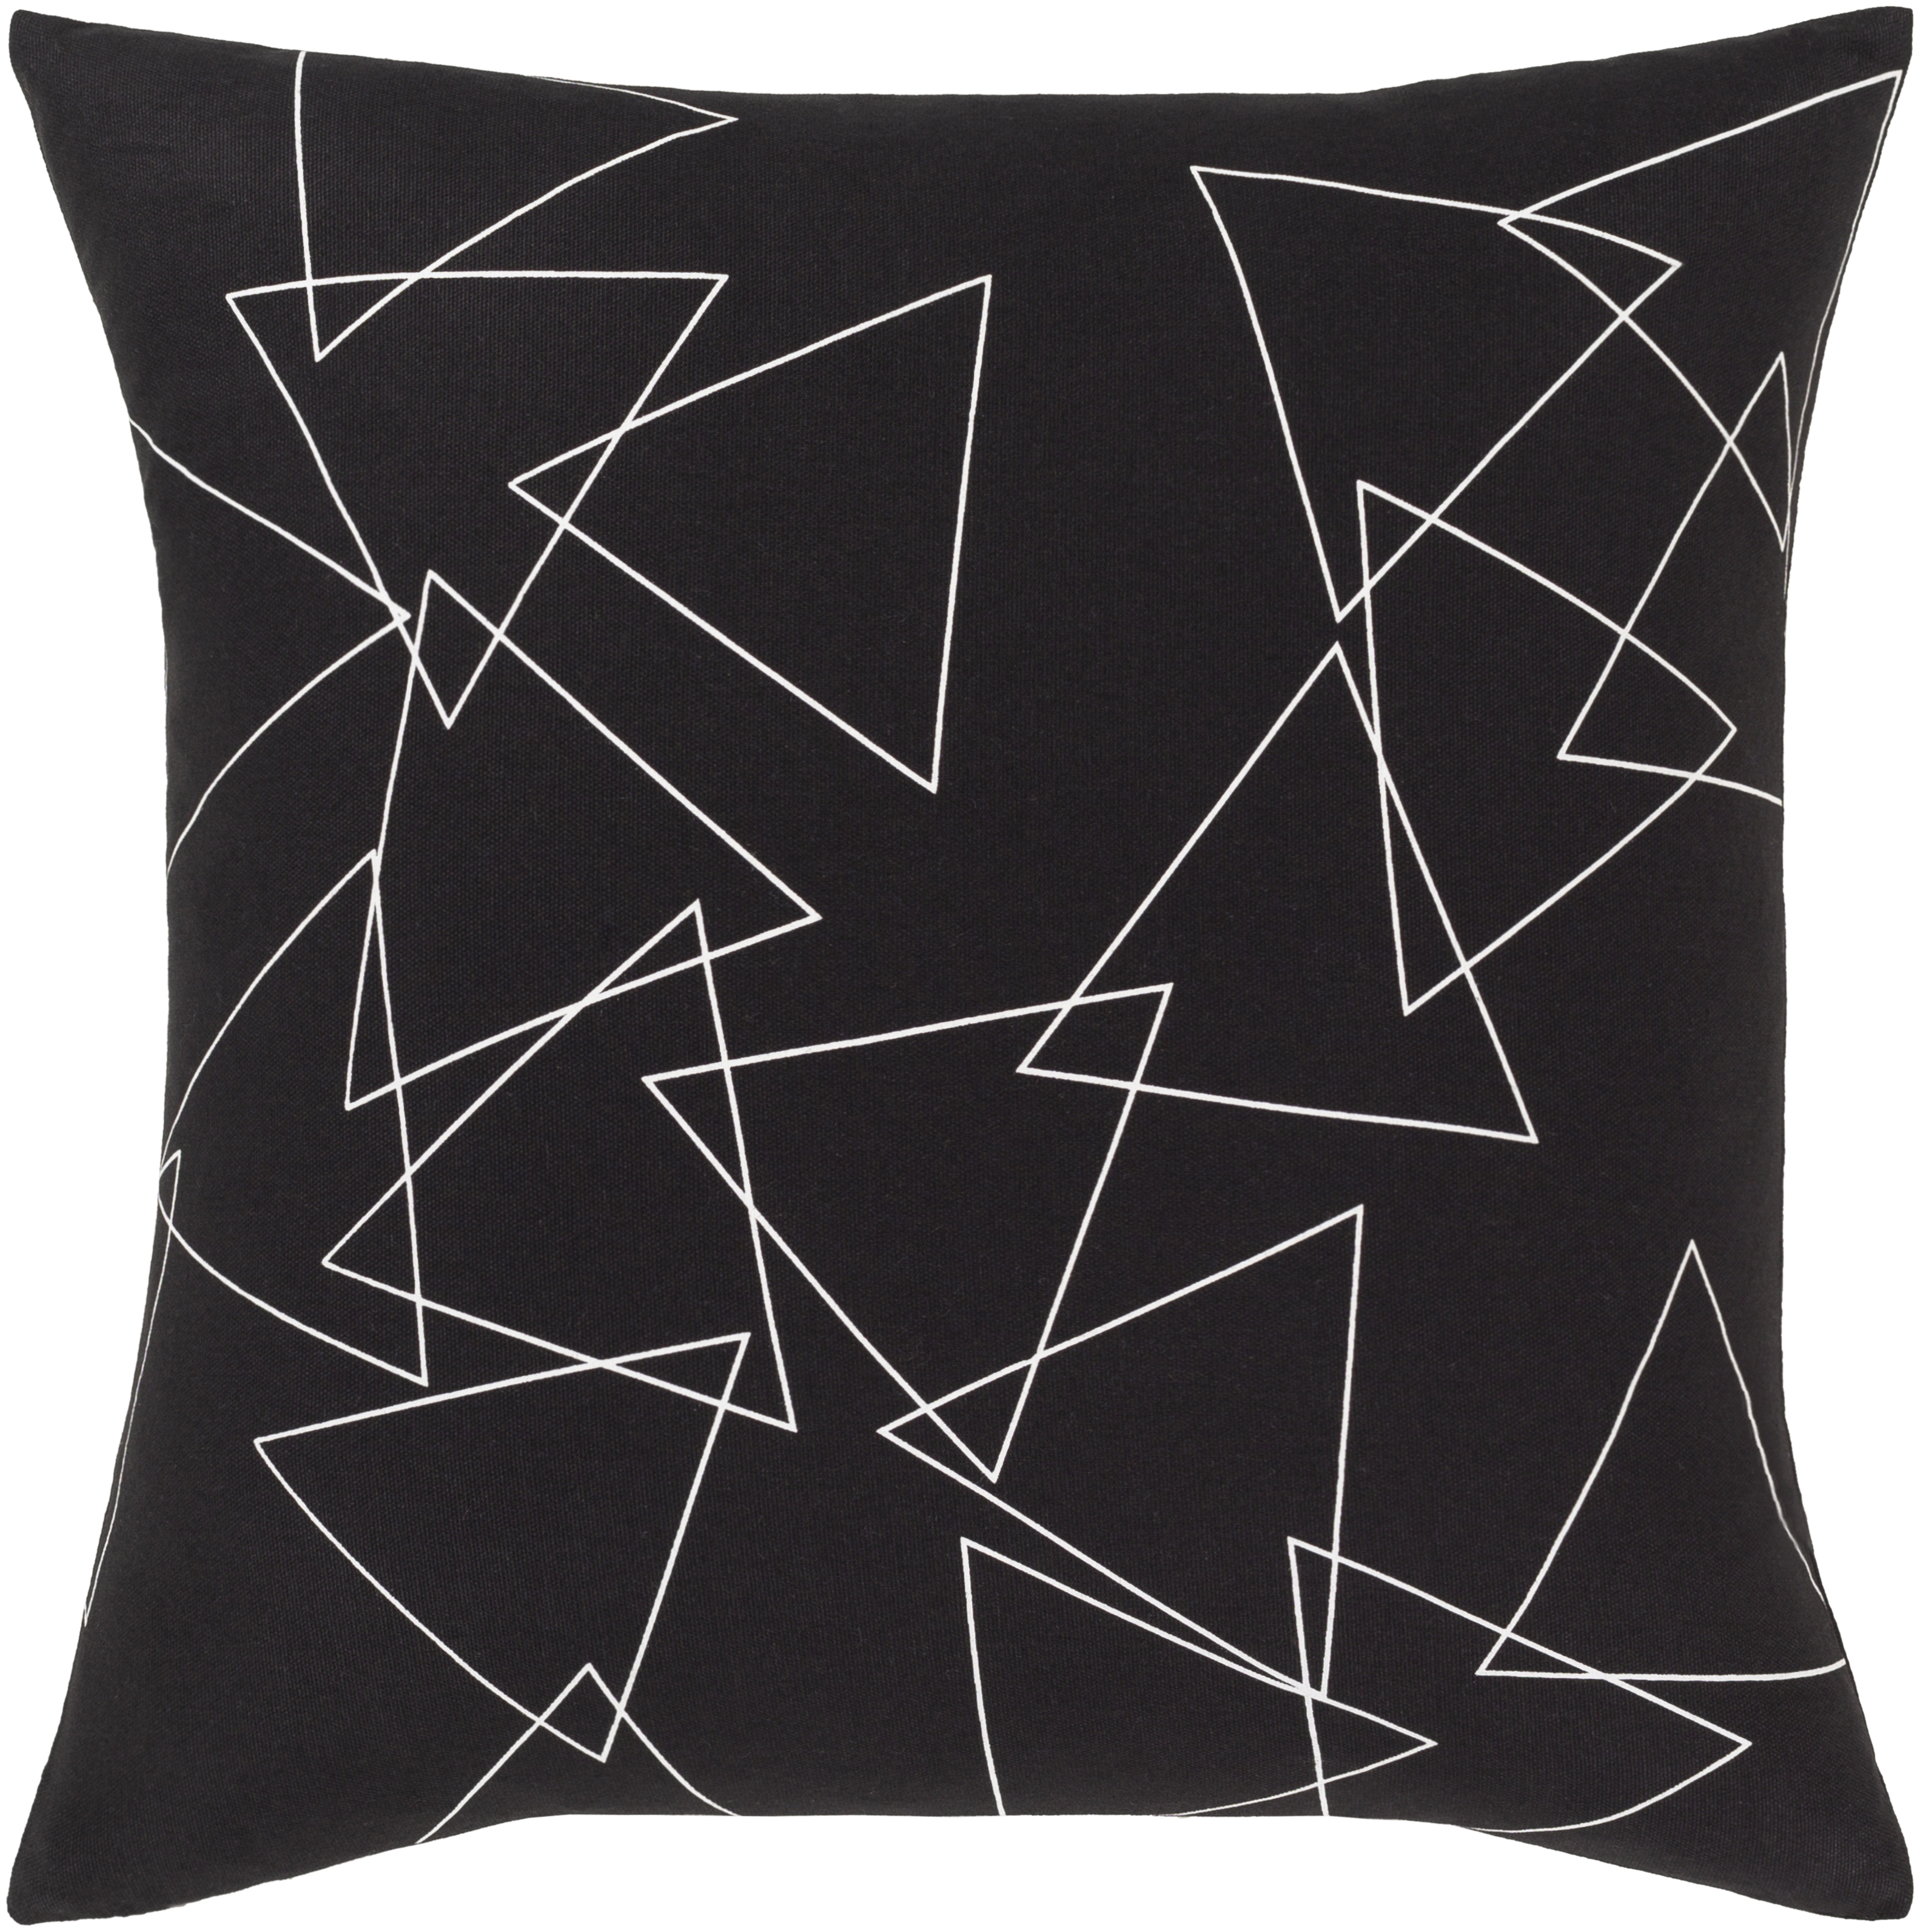 Graphic Punch - GPC-006 - 18" x 18" - pillow cover only - Image 0